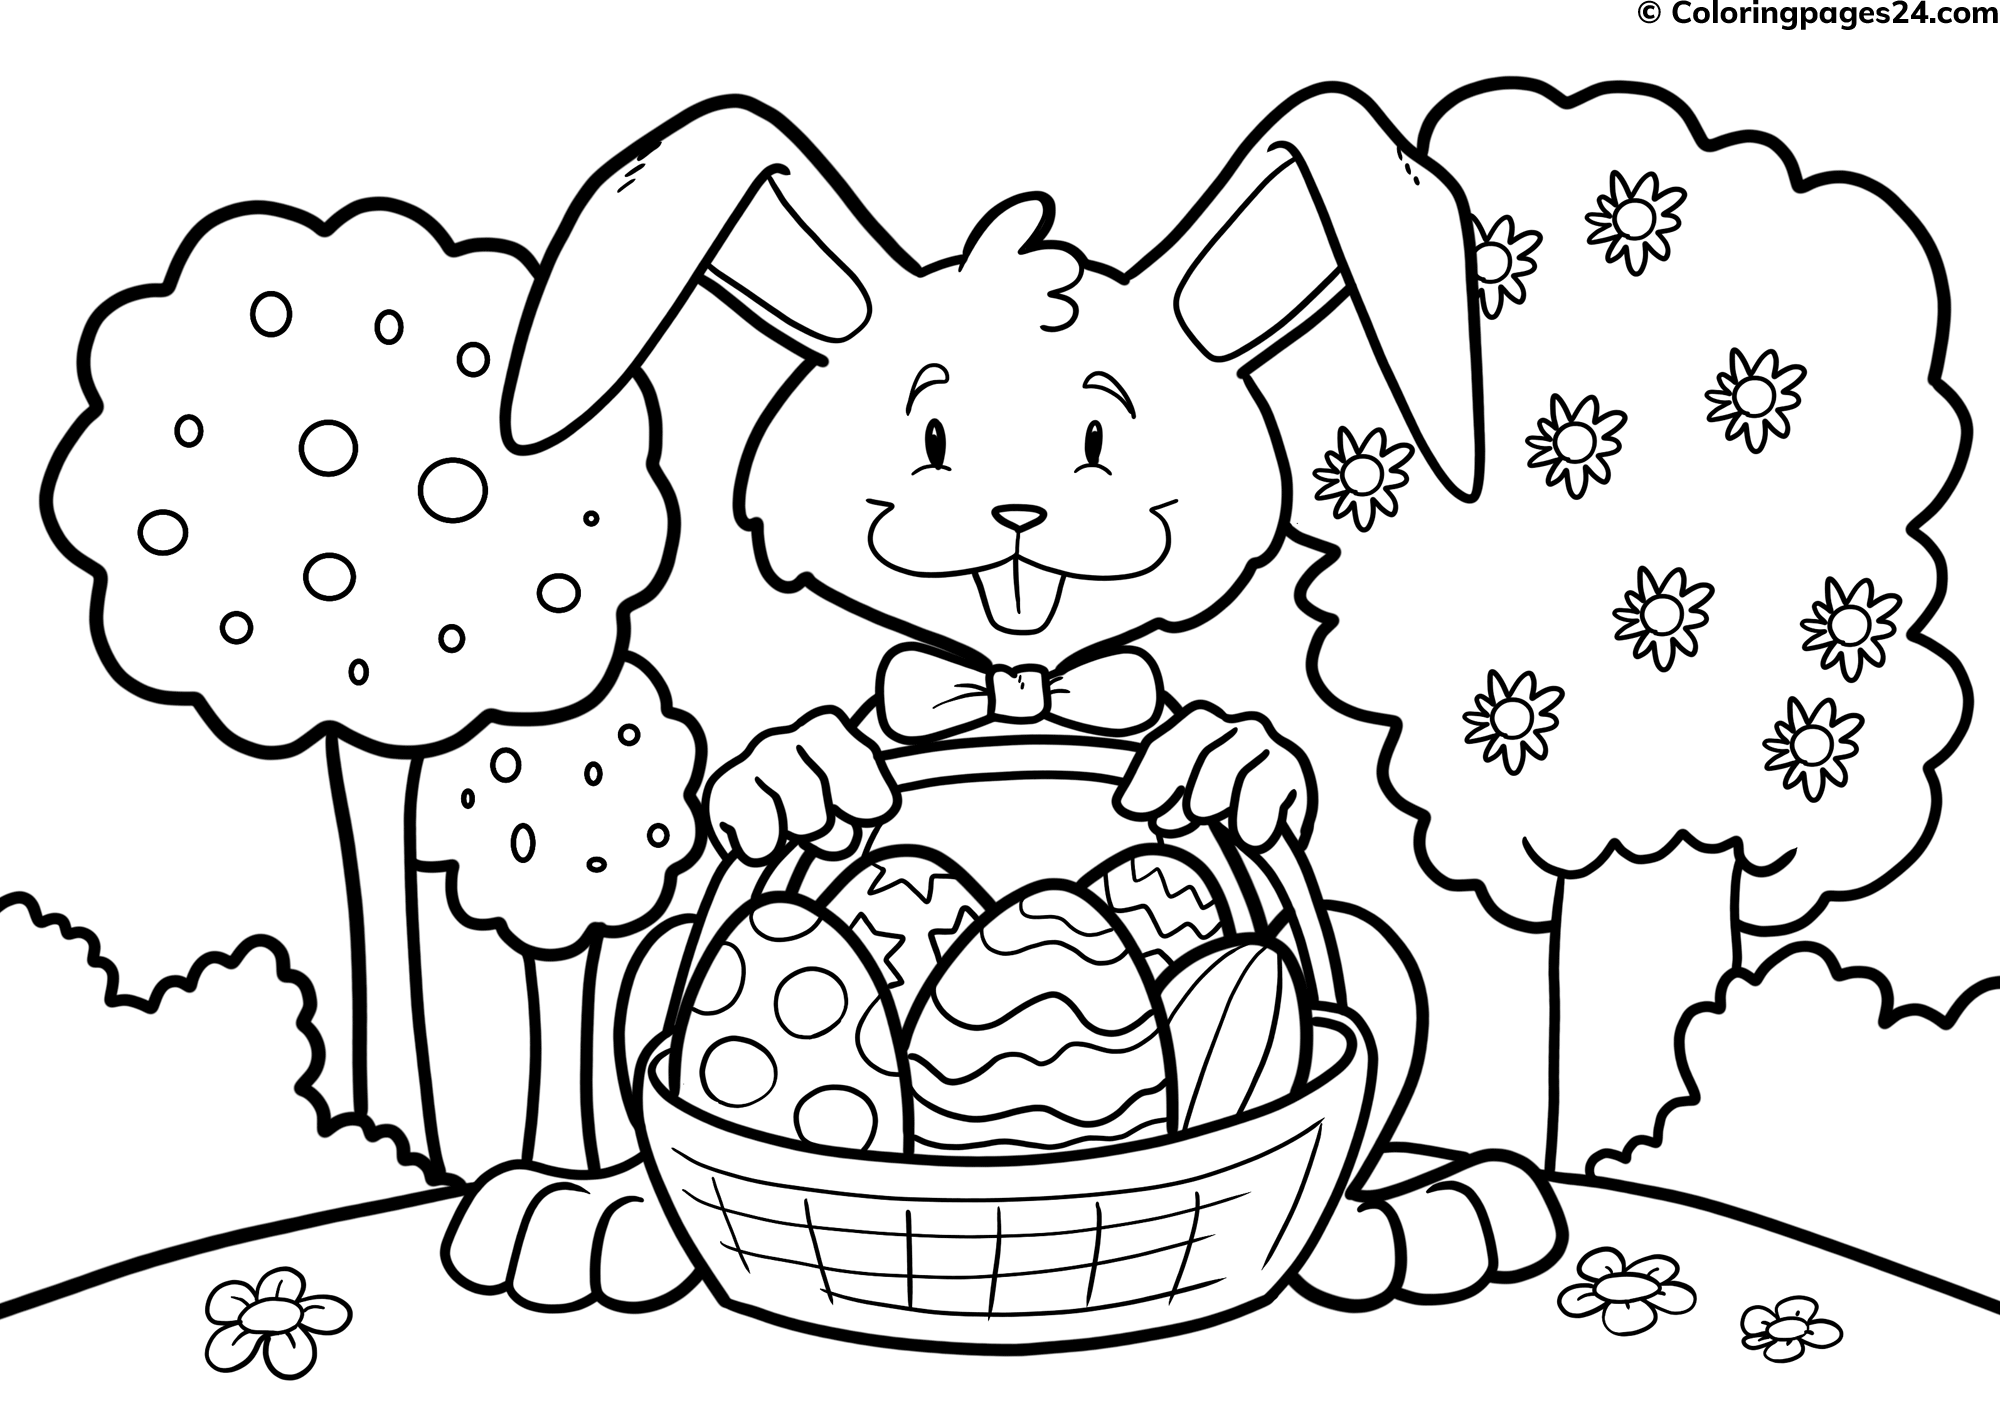 Easter rabbit holding a basket filled with Easter eggs